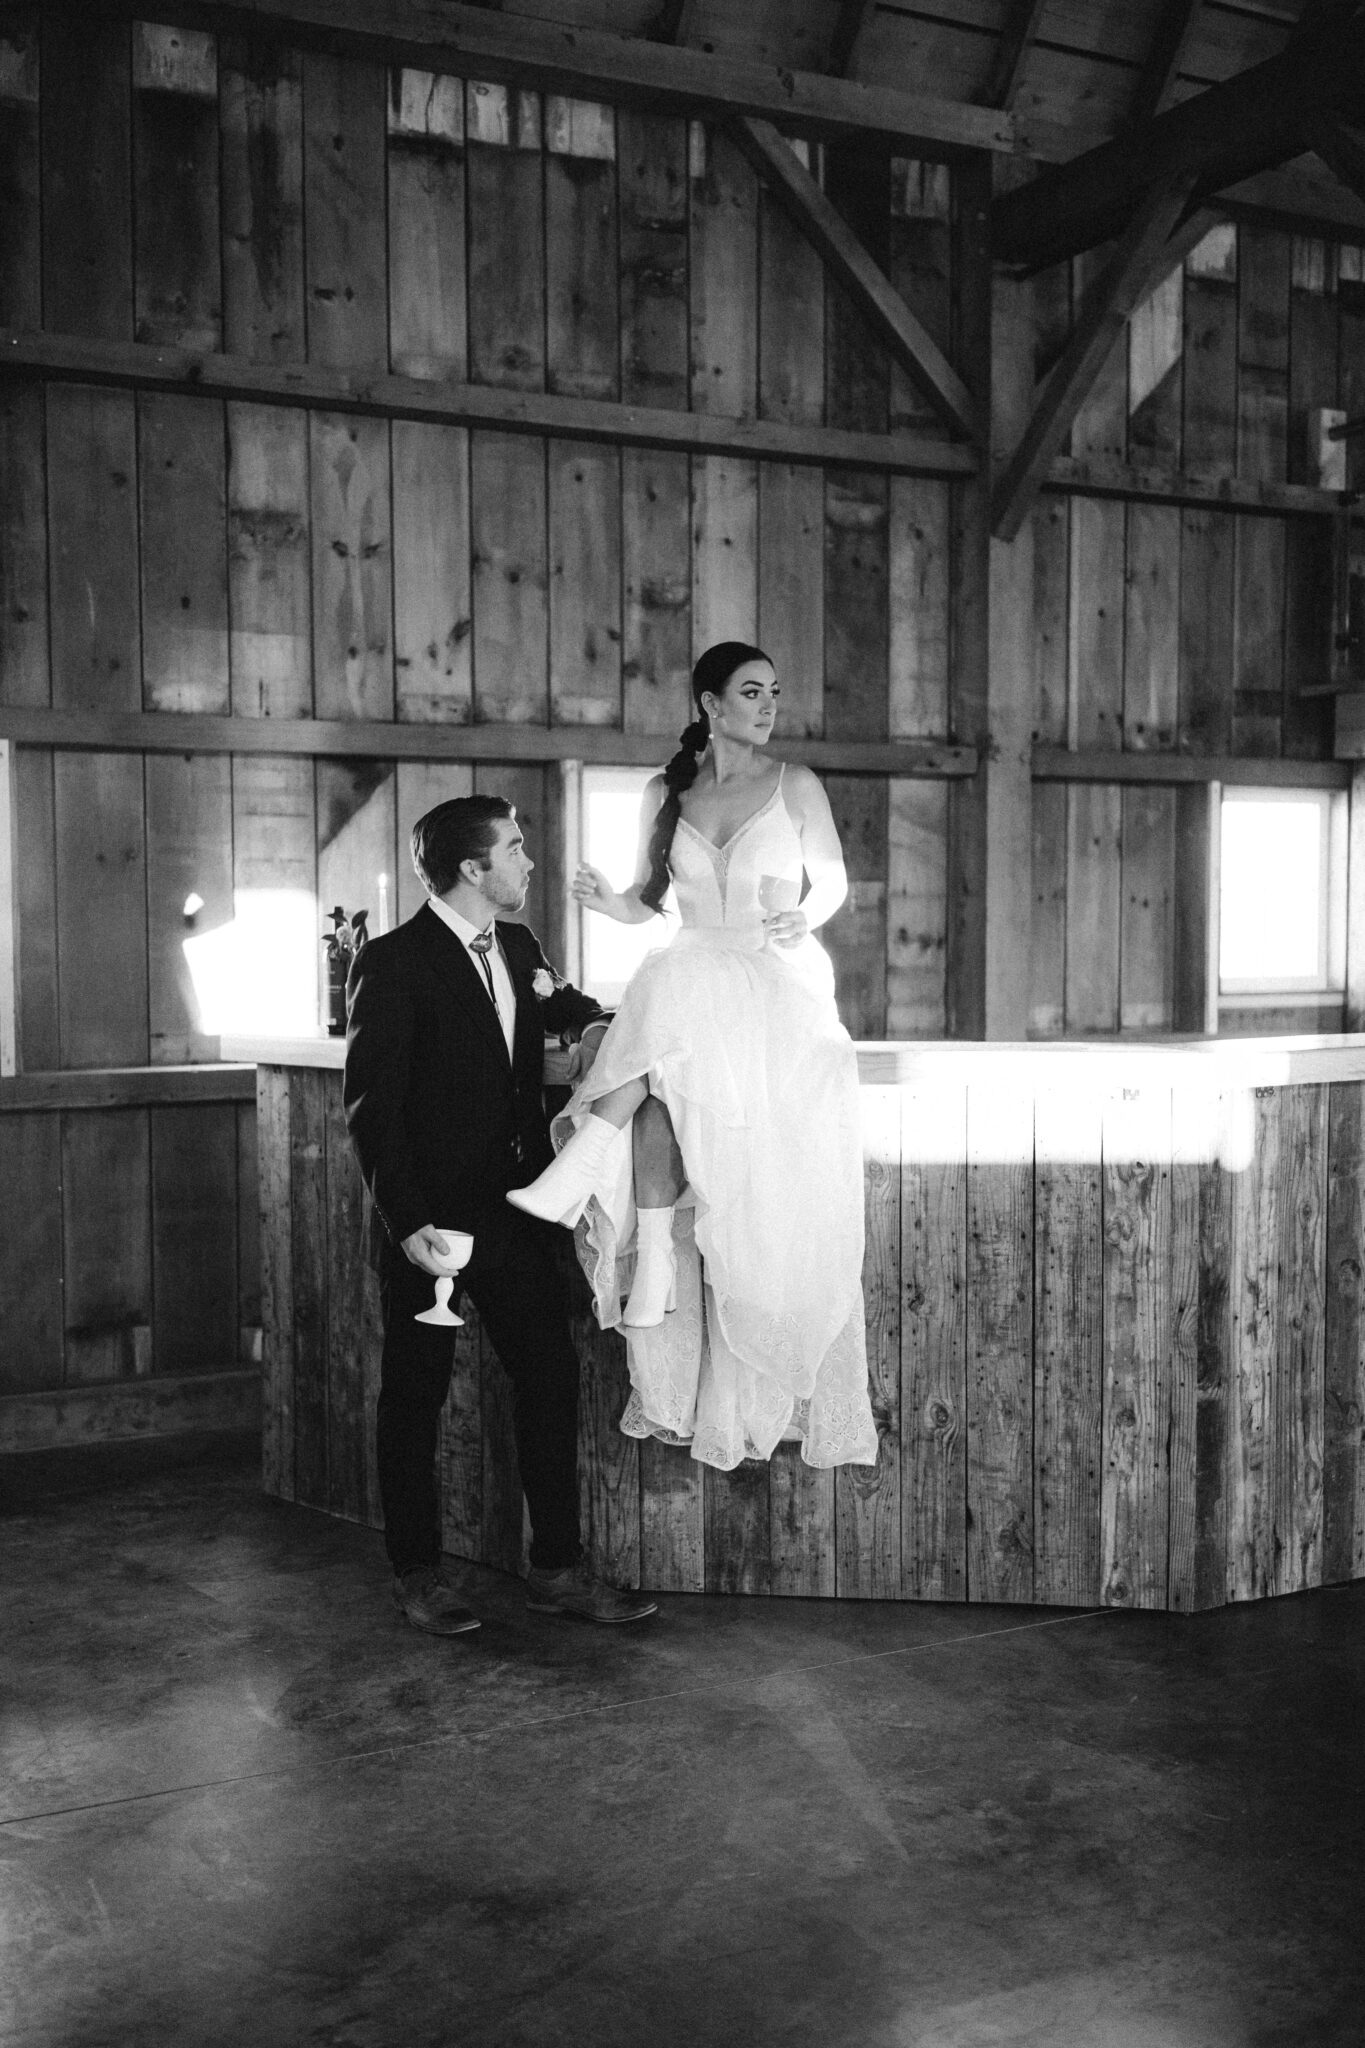 Wedding Inspiration With An Updated Take on Country Chic Wedding Style at Countryside Barn in Lethbridge Alberta, black and white photography of bride and groom, vintage wedding attire, bride and groom at wedding bar, portraits